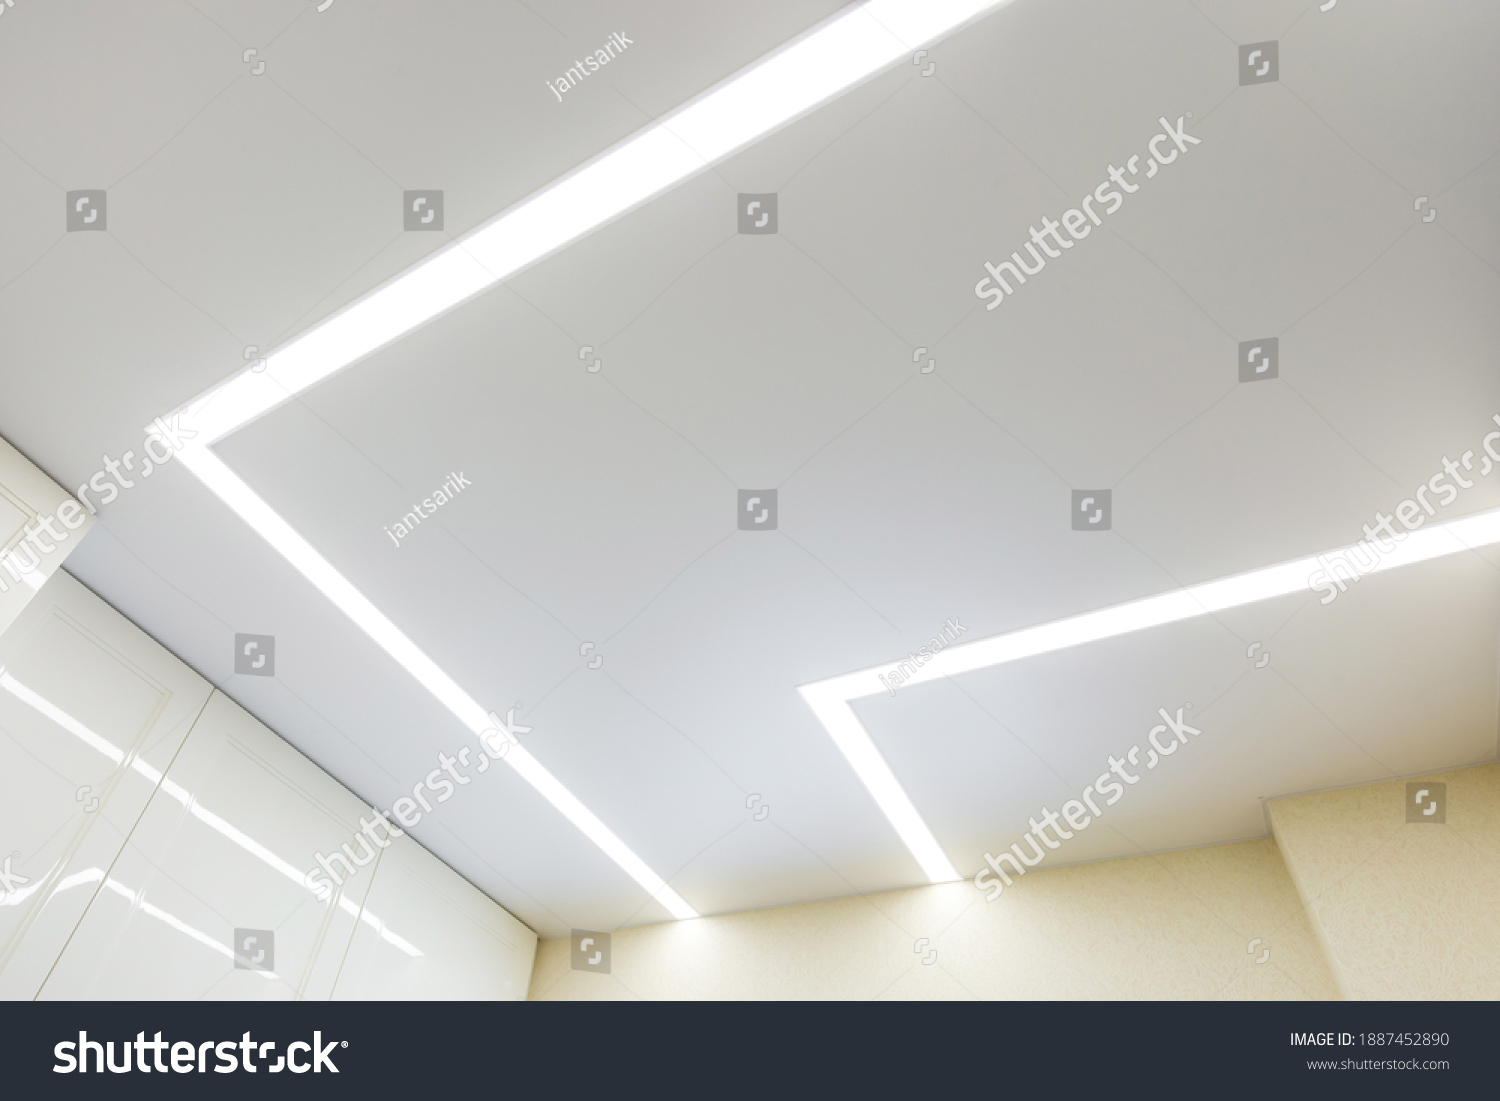 suspended ceiling with halogen spots lamps and drywall construction in empty room in apartment or house. Stretch ceiling white and complex shape. #1887452890